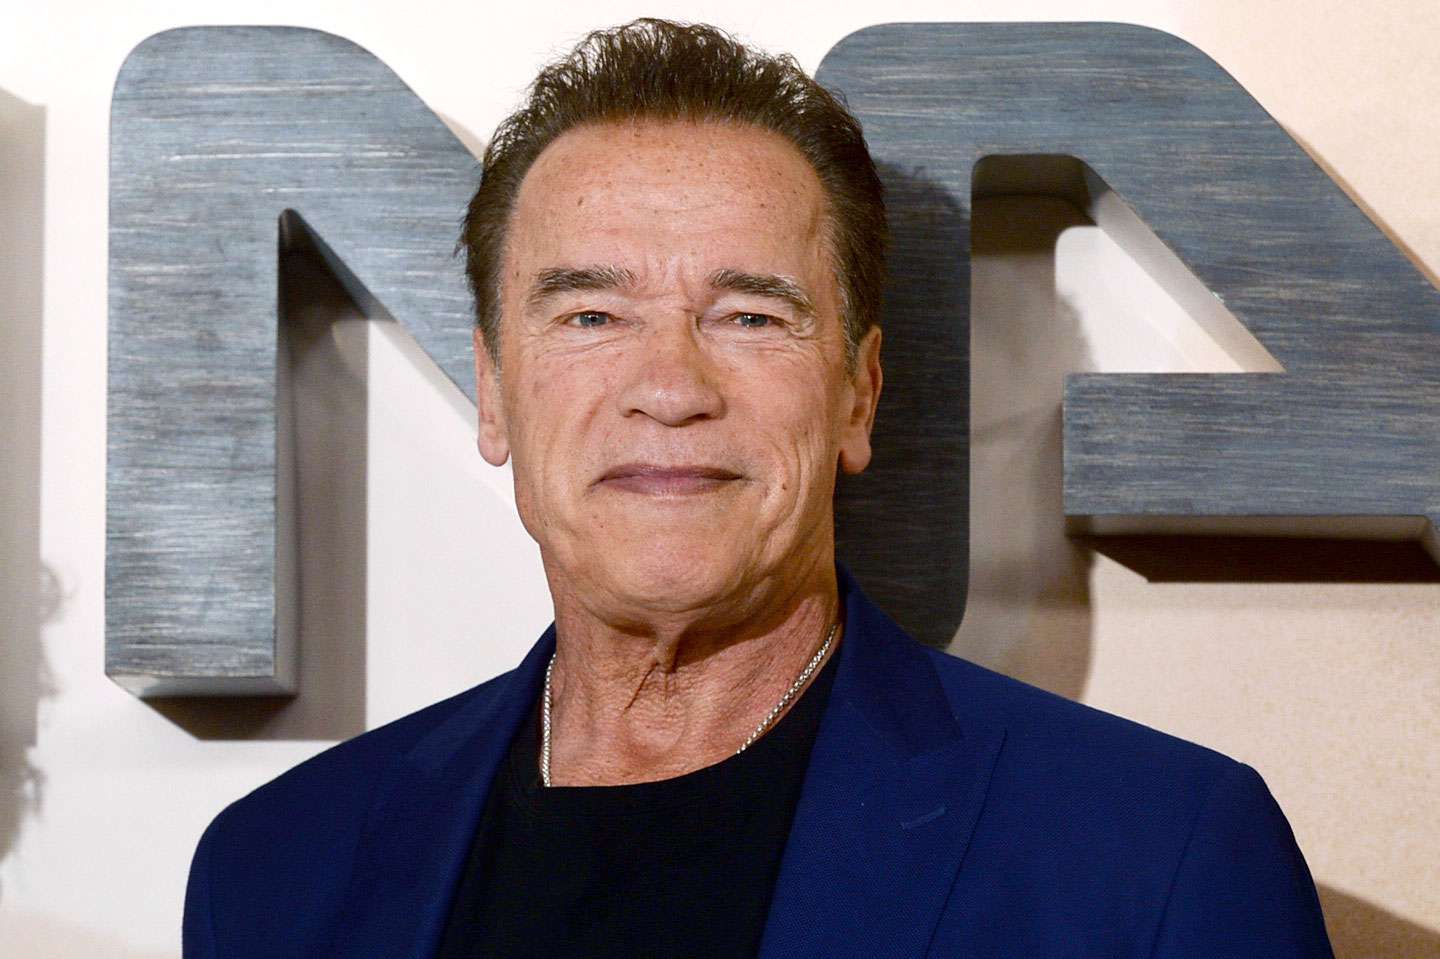 Arnold Schwarzenegger is ‘fine’ after car accident